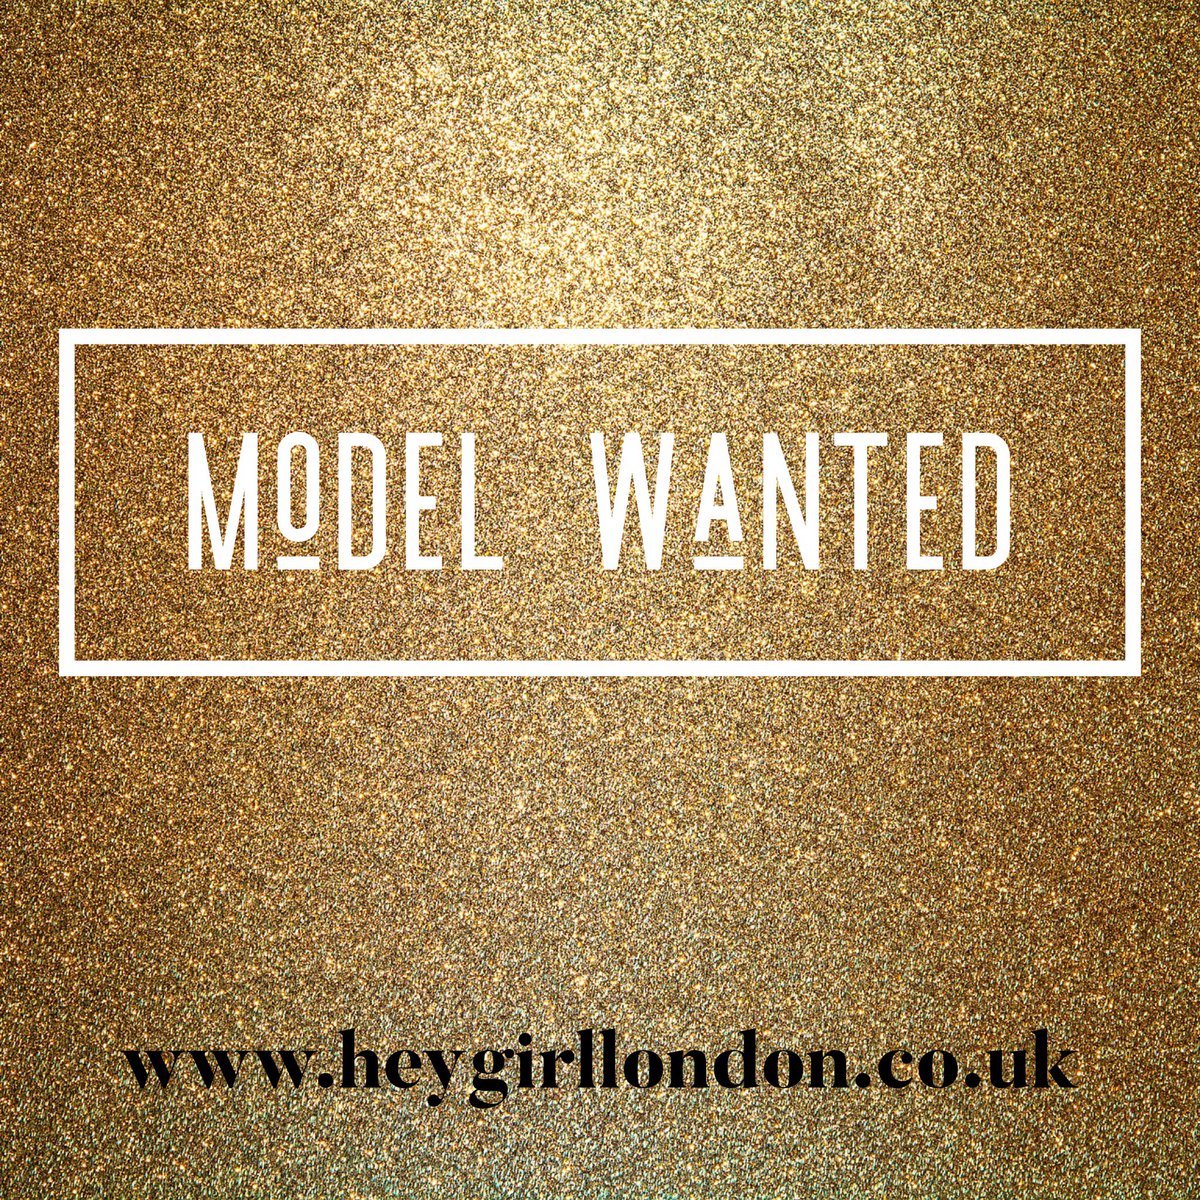 MODEL WANTED

Tue 26 Feb 10.am-12noon 
Travel expenses paid
Girl London c/o @Sole_beauty #Victoria 
Complimentary - 24 Carat Gold Luxurious Facial 
call 07977 180180

#FREE #24caratgold #facial #microblading #beauty #skincare #facialaesthetics #bbglow